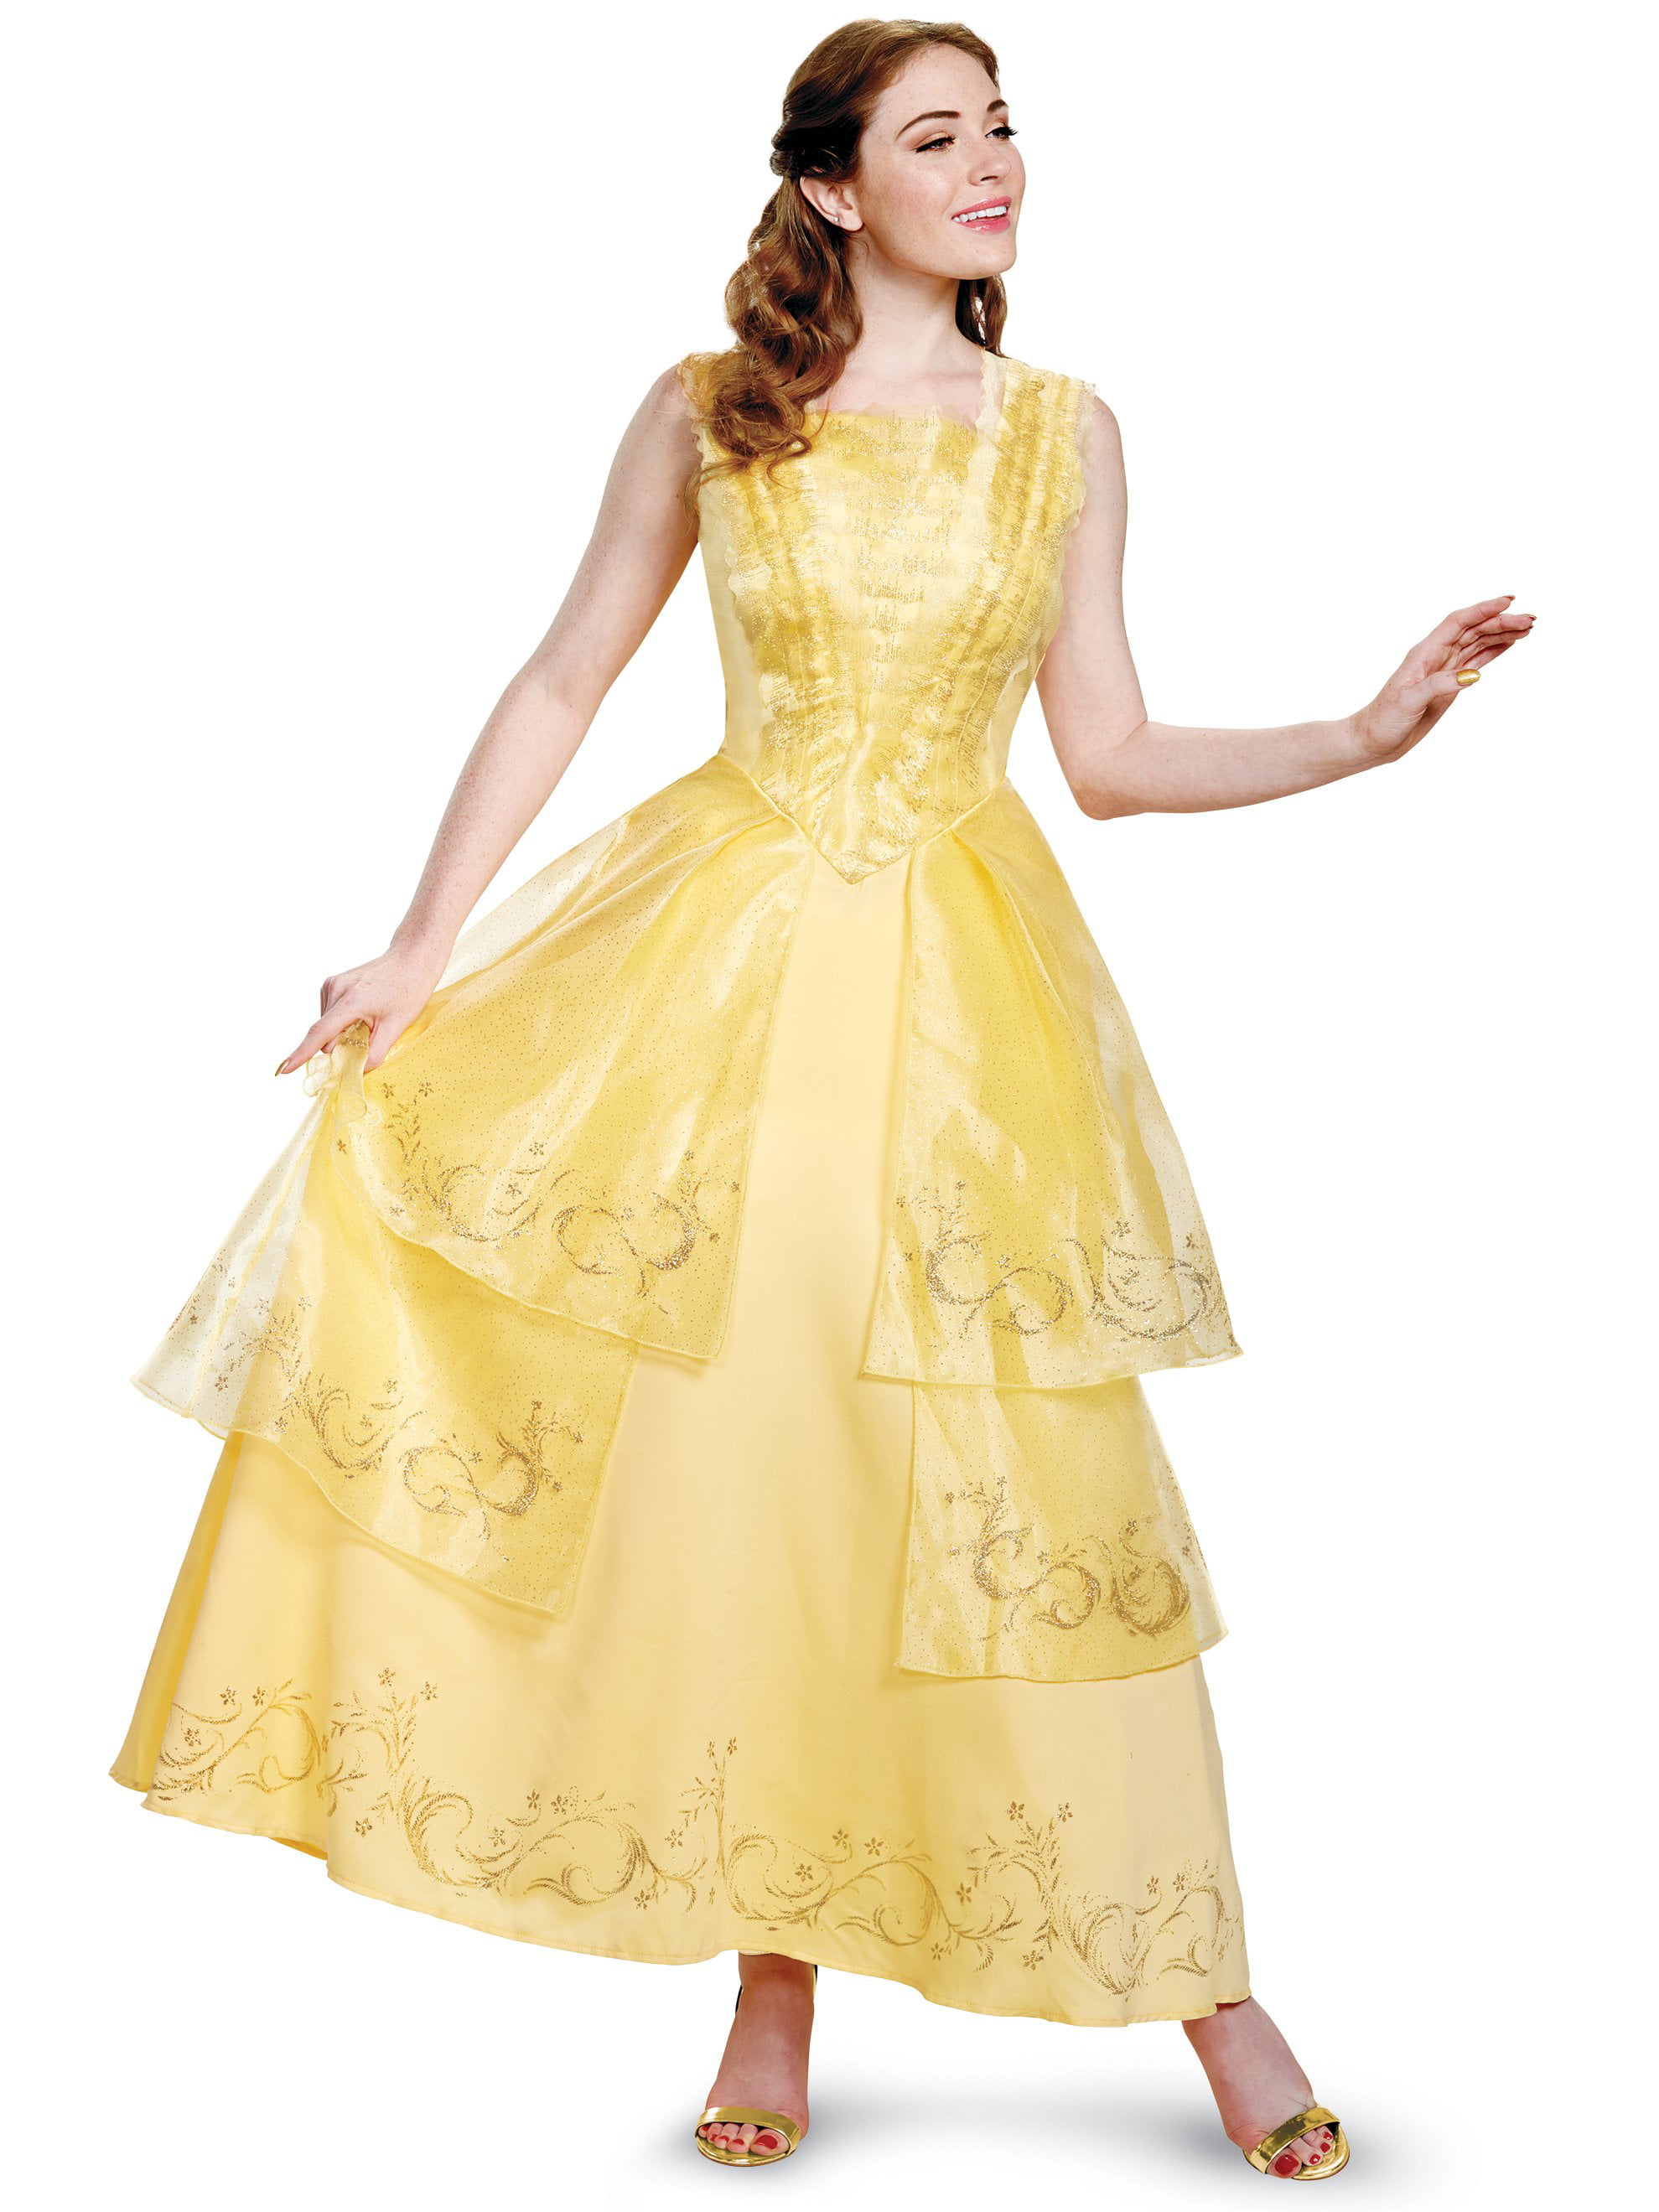 belle gown costume